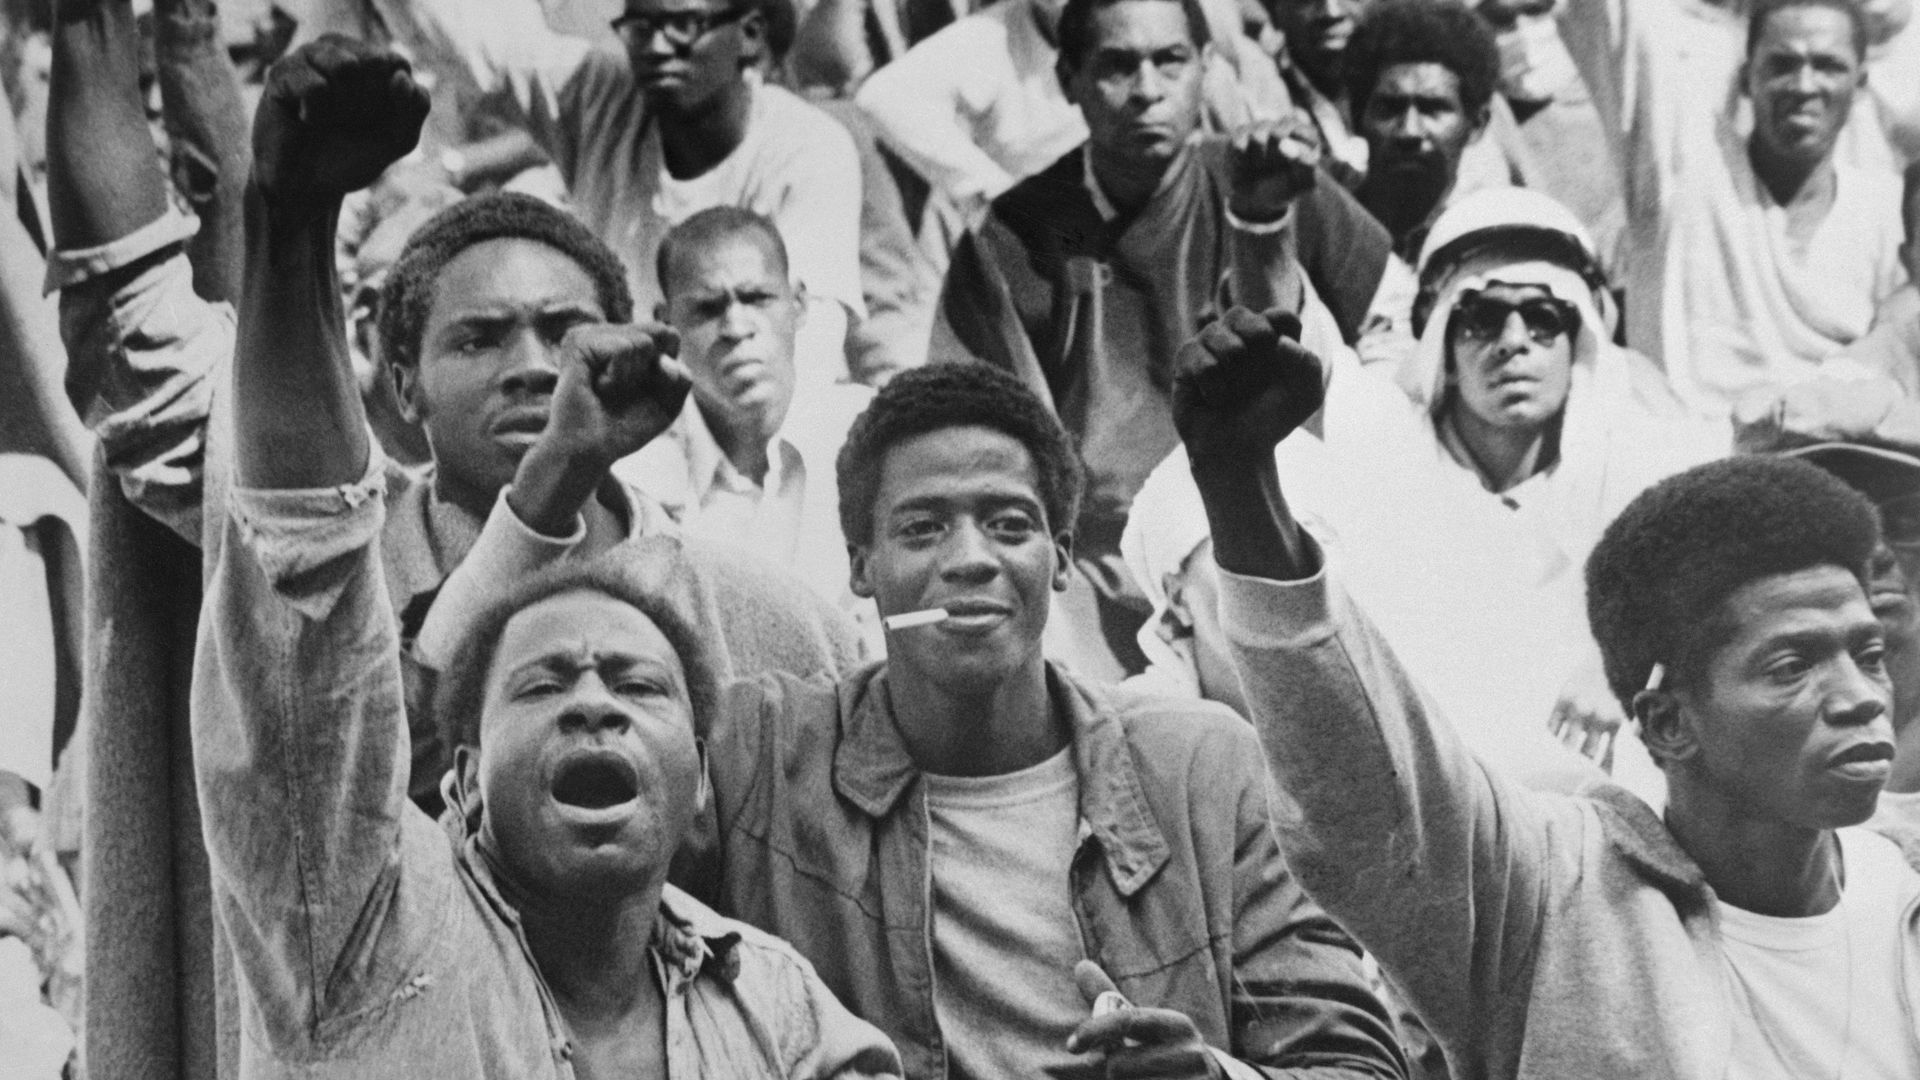 Black inmates at the Attica Correctional Facility give the black power salute while Commissioner R.G. Oswald negotiates with leaders of the takeover in 1971.